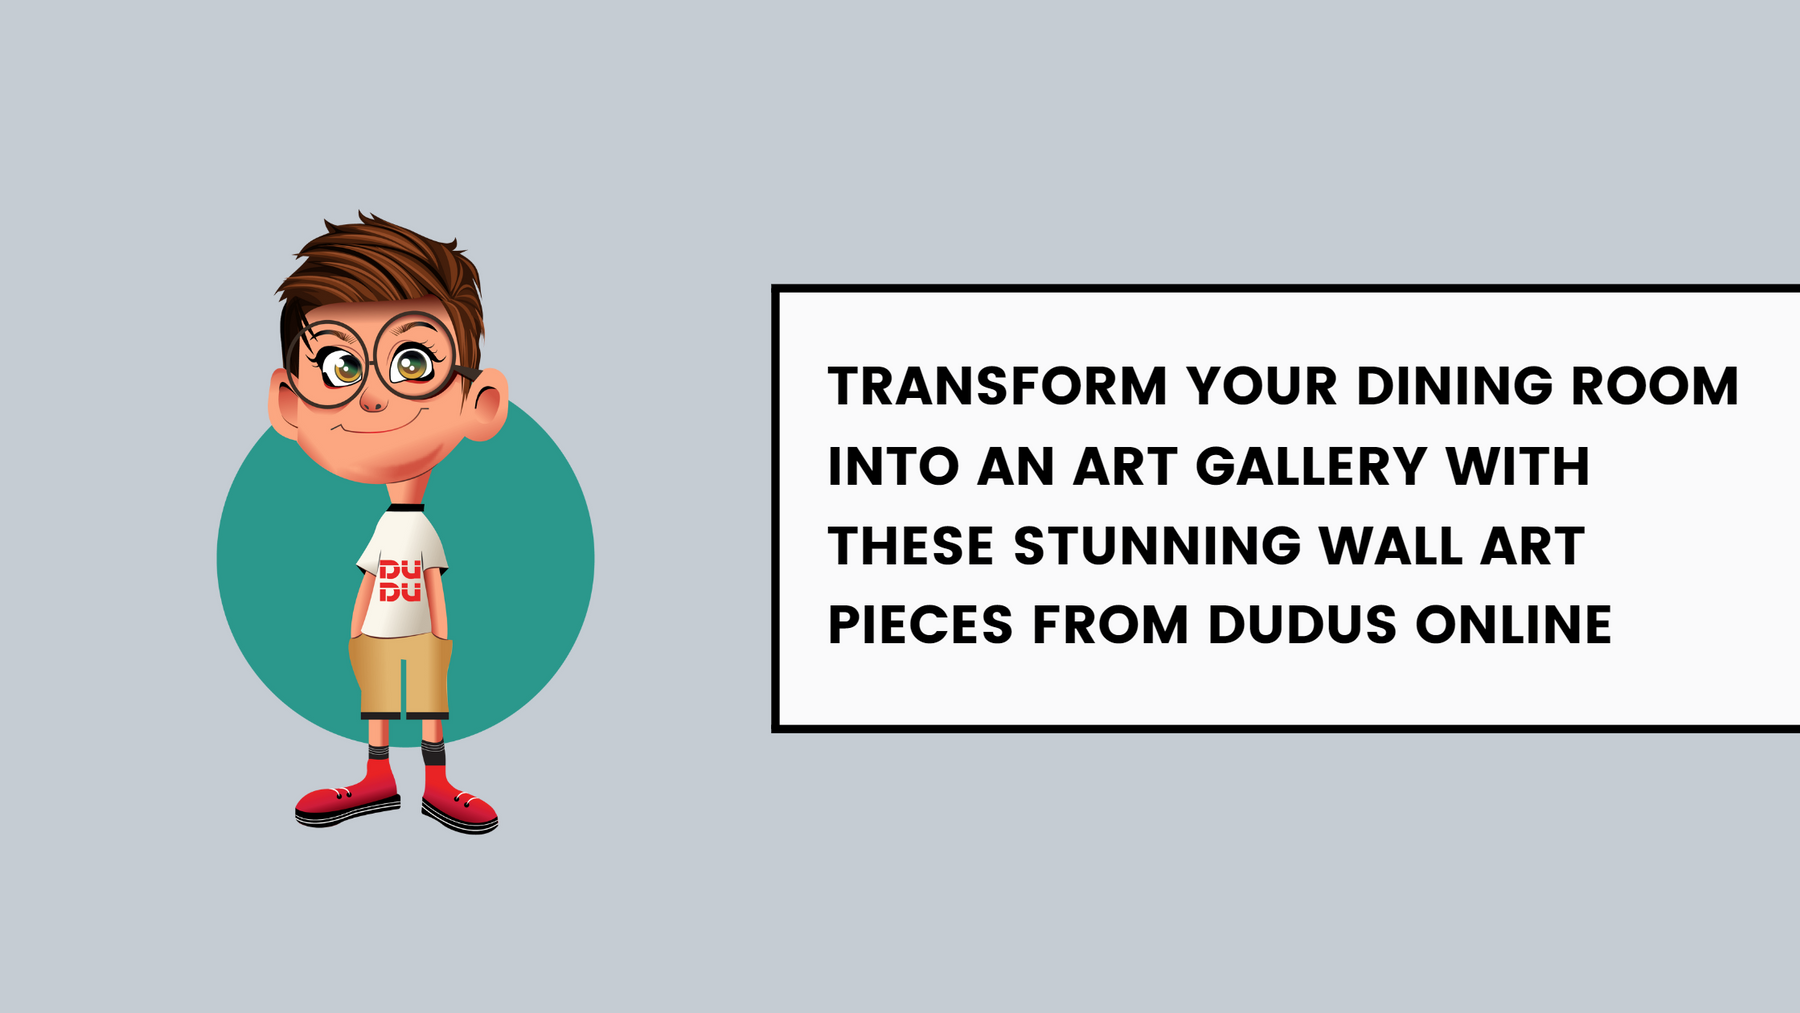 Transform Your Dining Room Into An Art Gallery With These Stunning Wall Art Pieces From Dudus Online